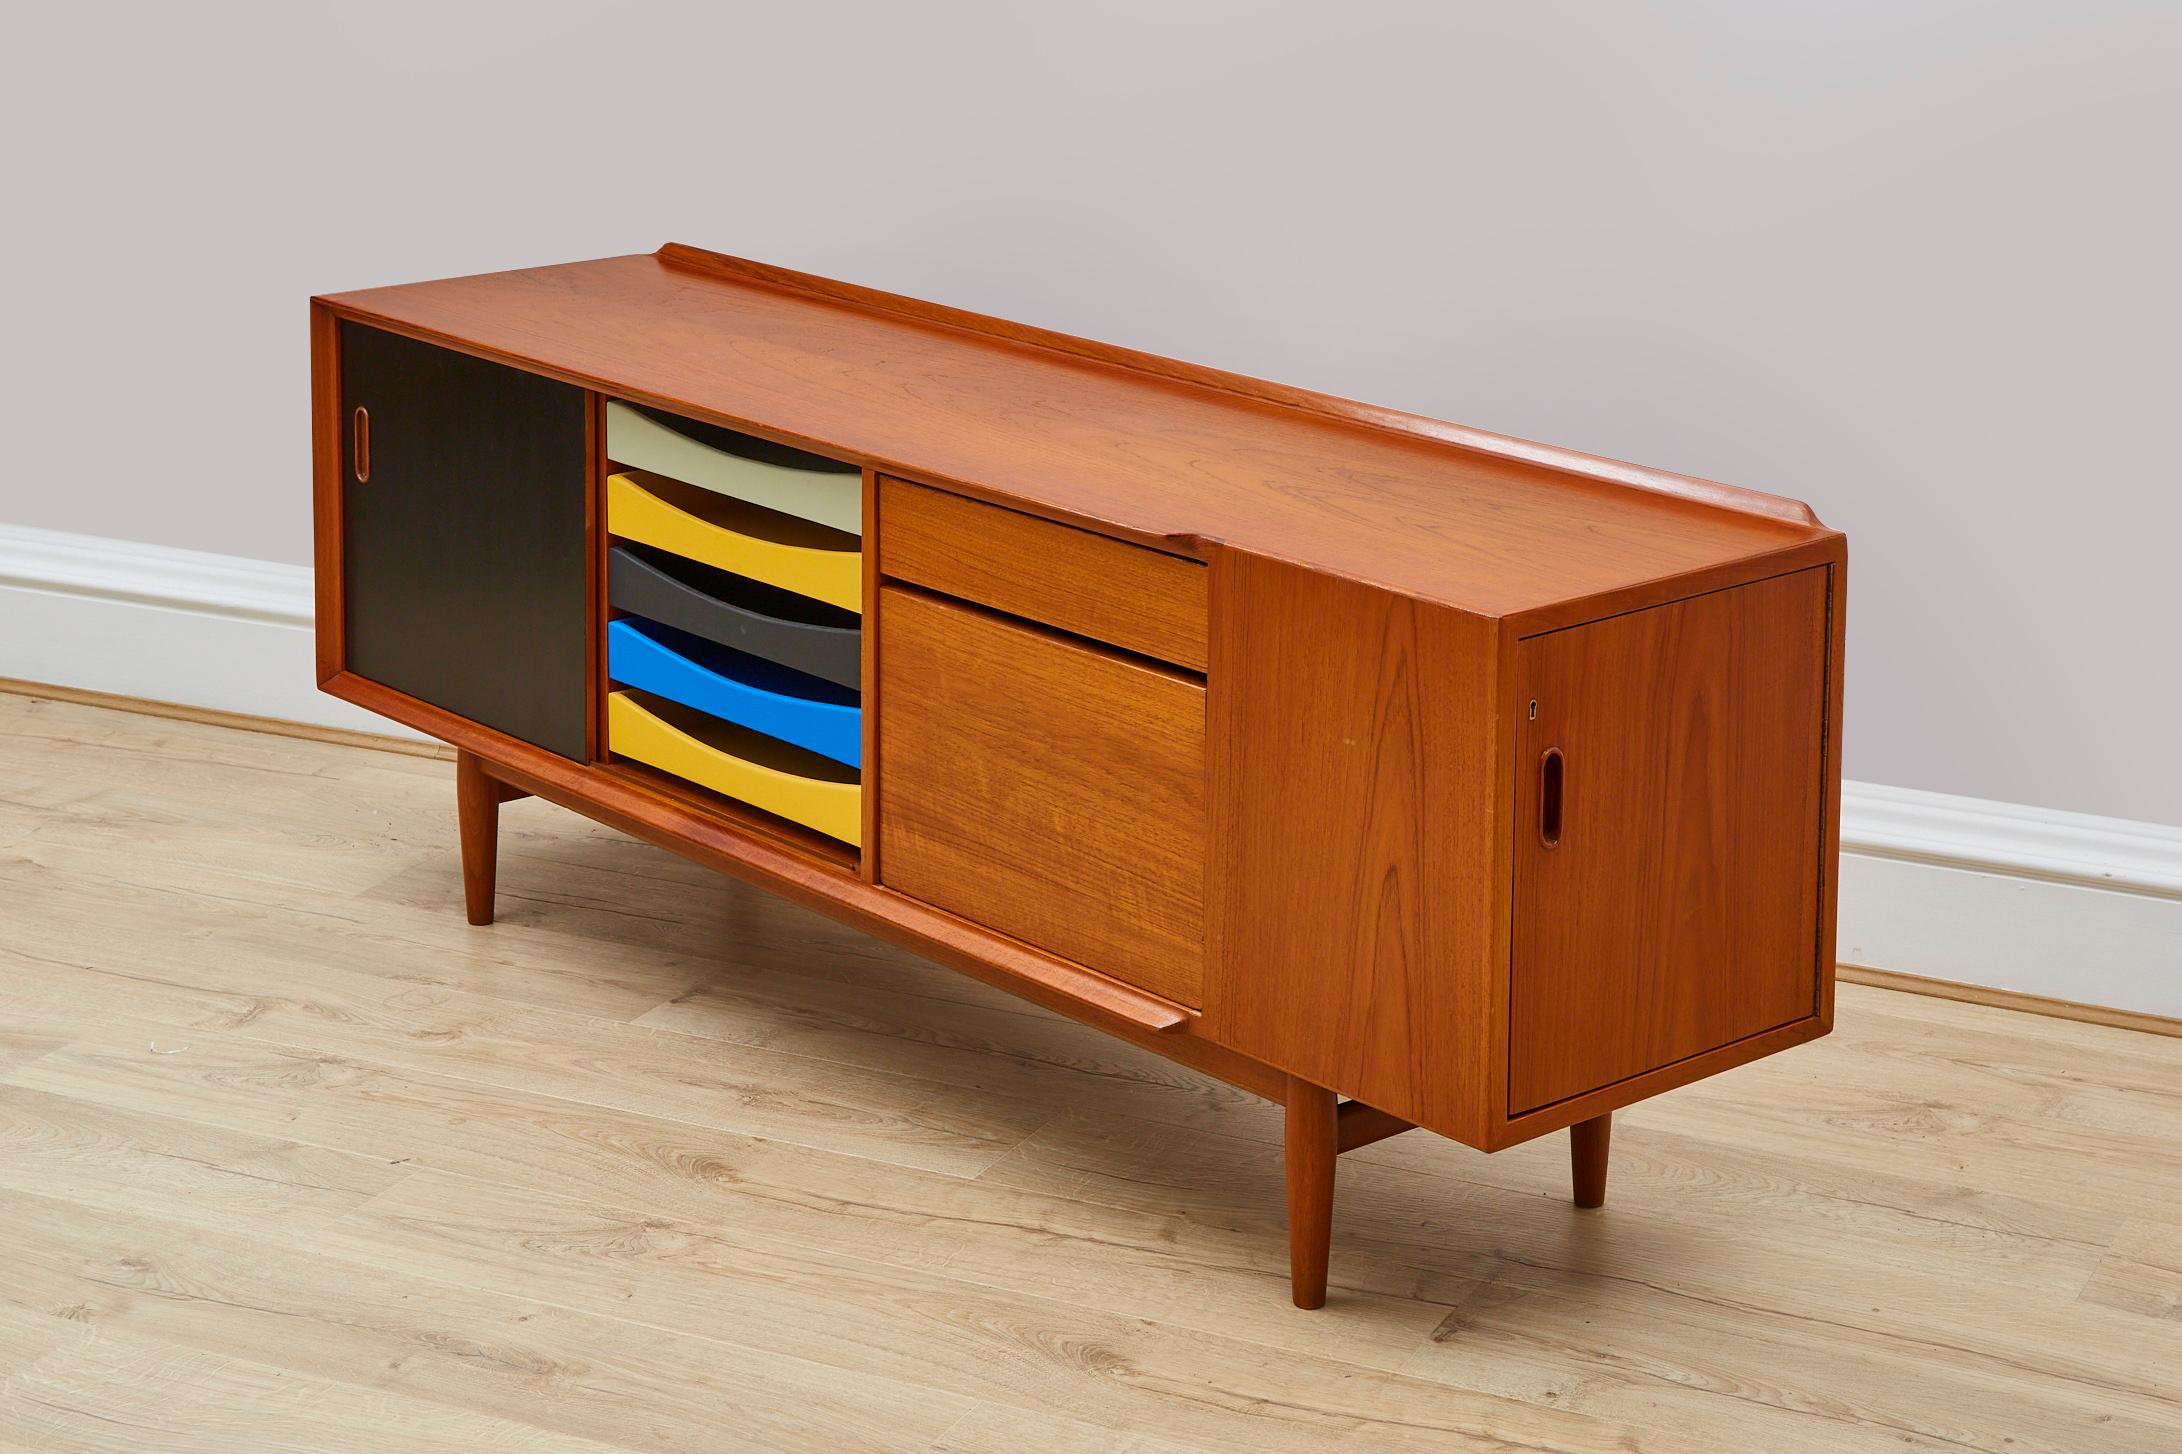 Teak wood with painted draws Credenza sideboard. Four drawers of different colours, a box and a sliding door opening onto a storage with an adjustable shelf. The door flips over and has one side painted black and the other teak. On the right side